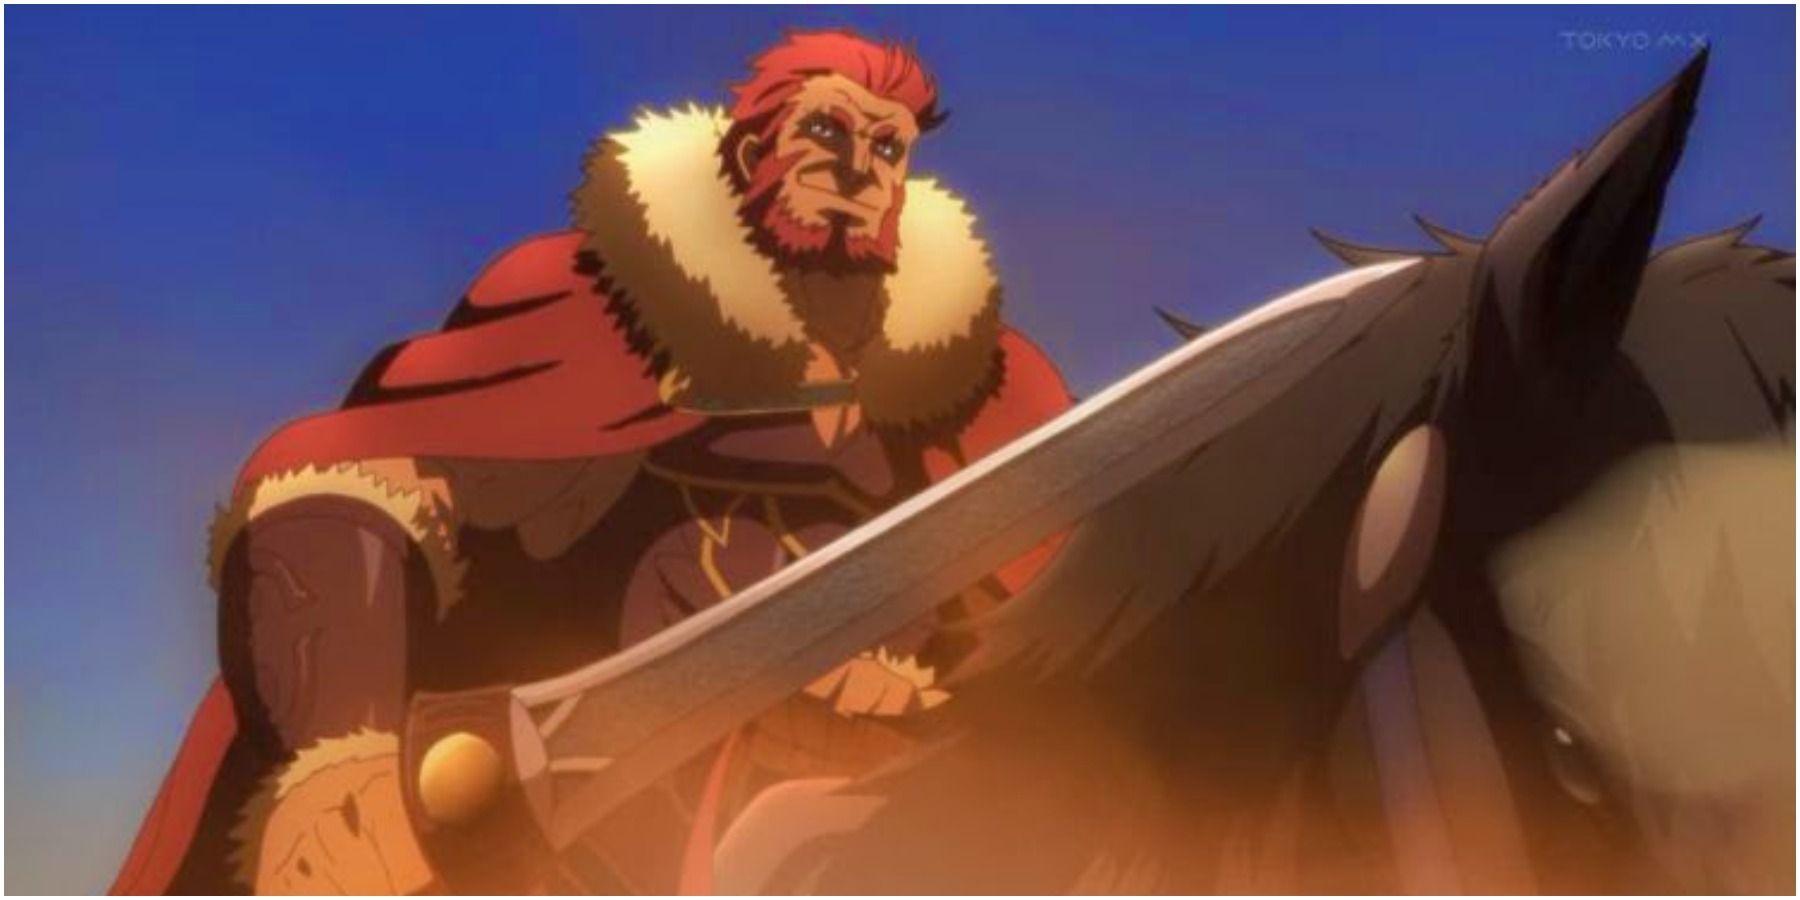 Fate anime - Alexander The Great Riding Into Battle With His Noble Phantasm